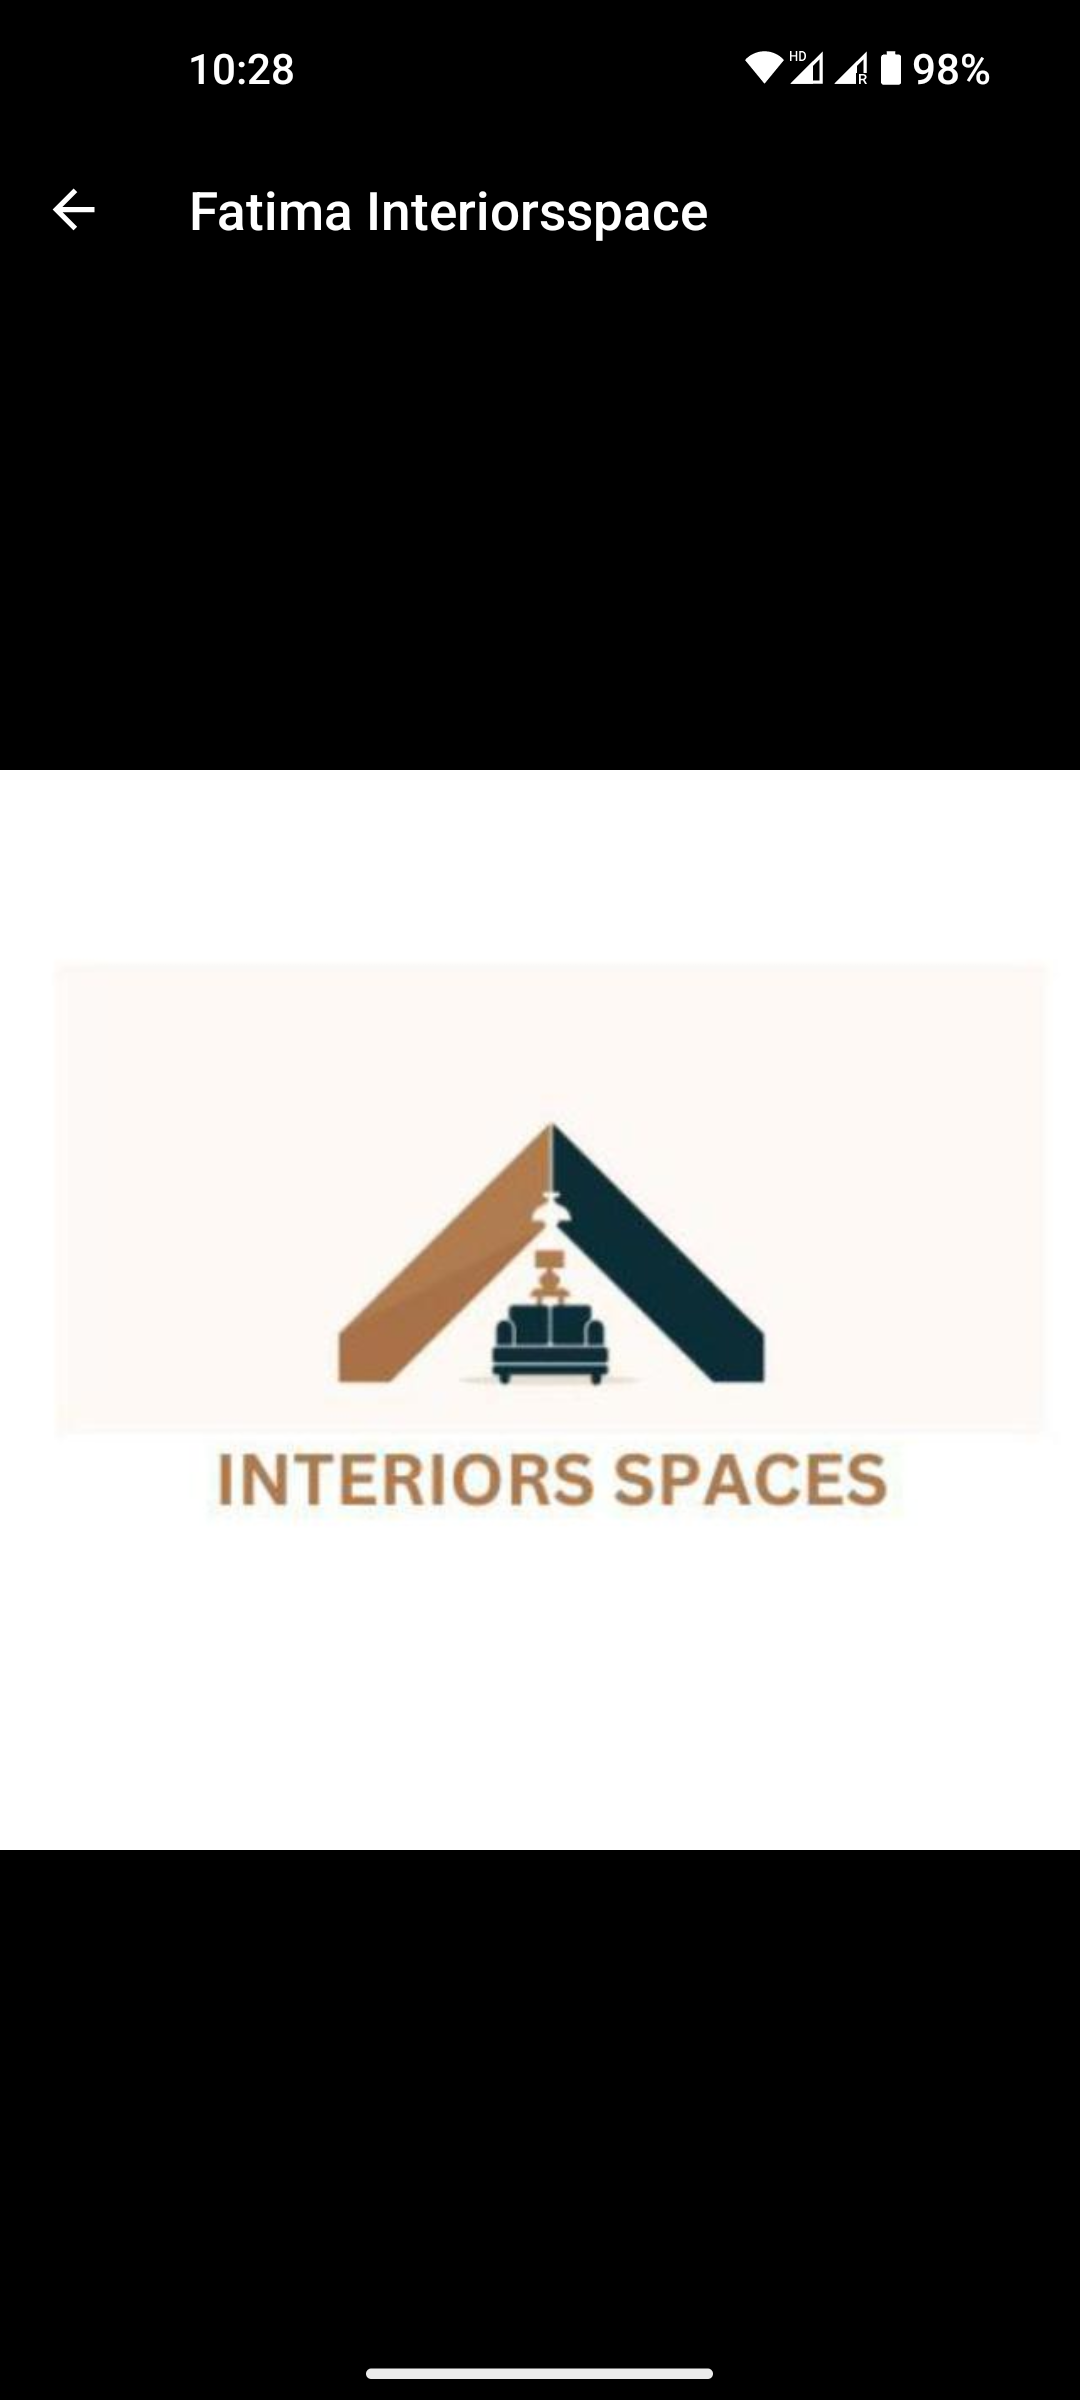 https://salesprofessionals.co.in/company/interiorsspaces